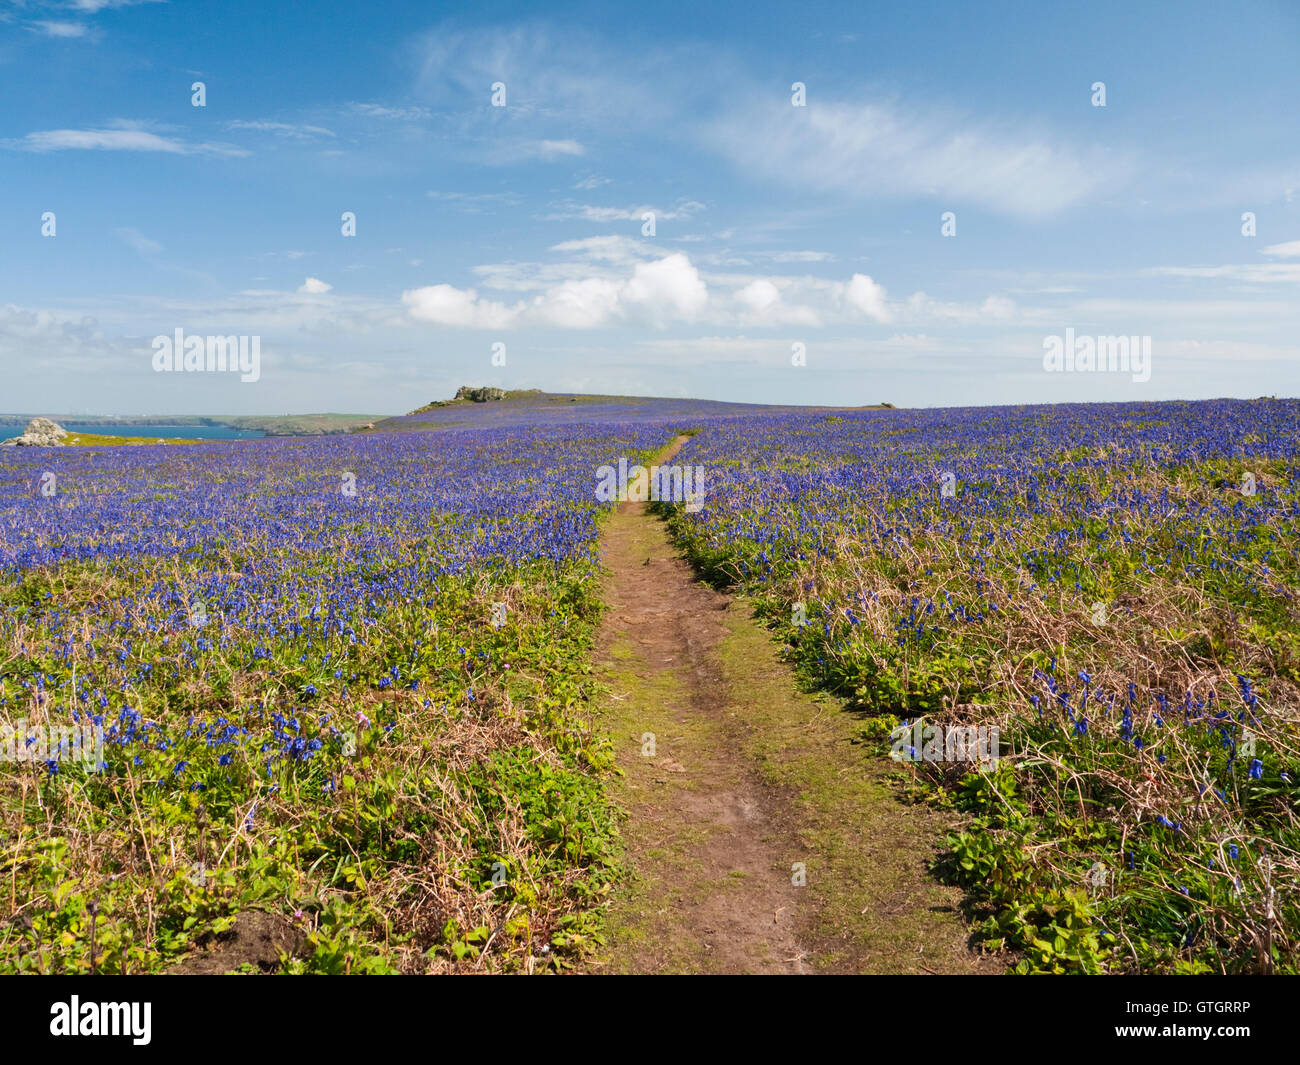 Native Bluebells (Hyacinthoides non-scripta) on the island of Skomer in the Pembrokeshire Coast National Park, Wales Stock Photo